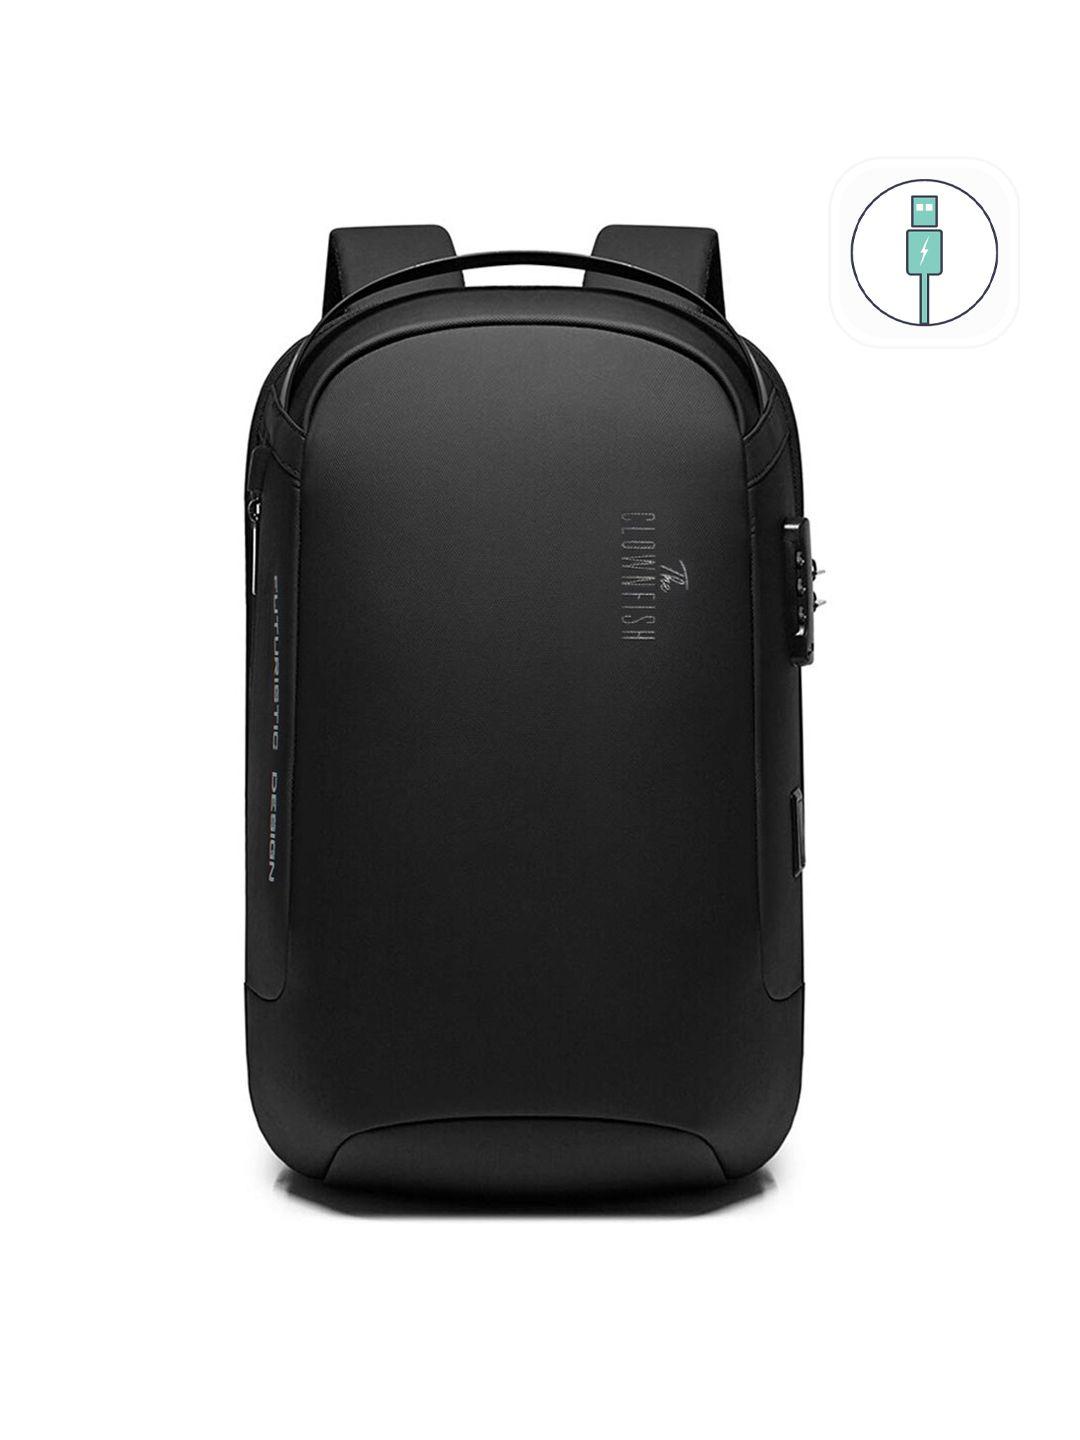 the-clownfish-unisex-black-backpack-with-usb-charging-port